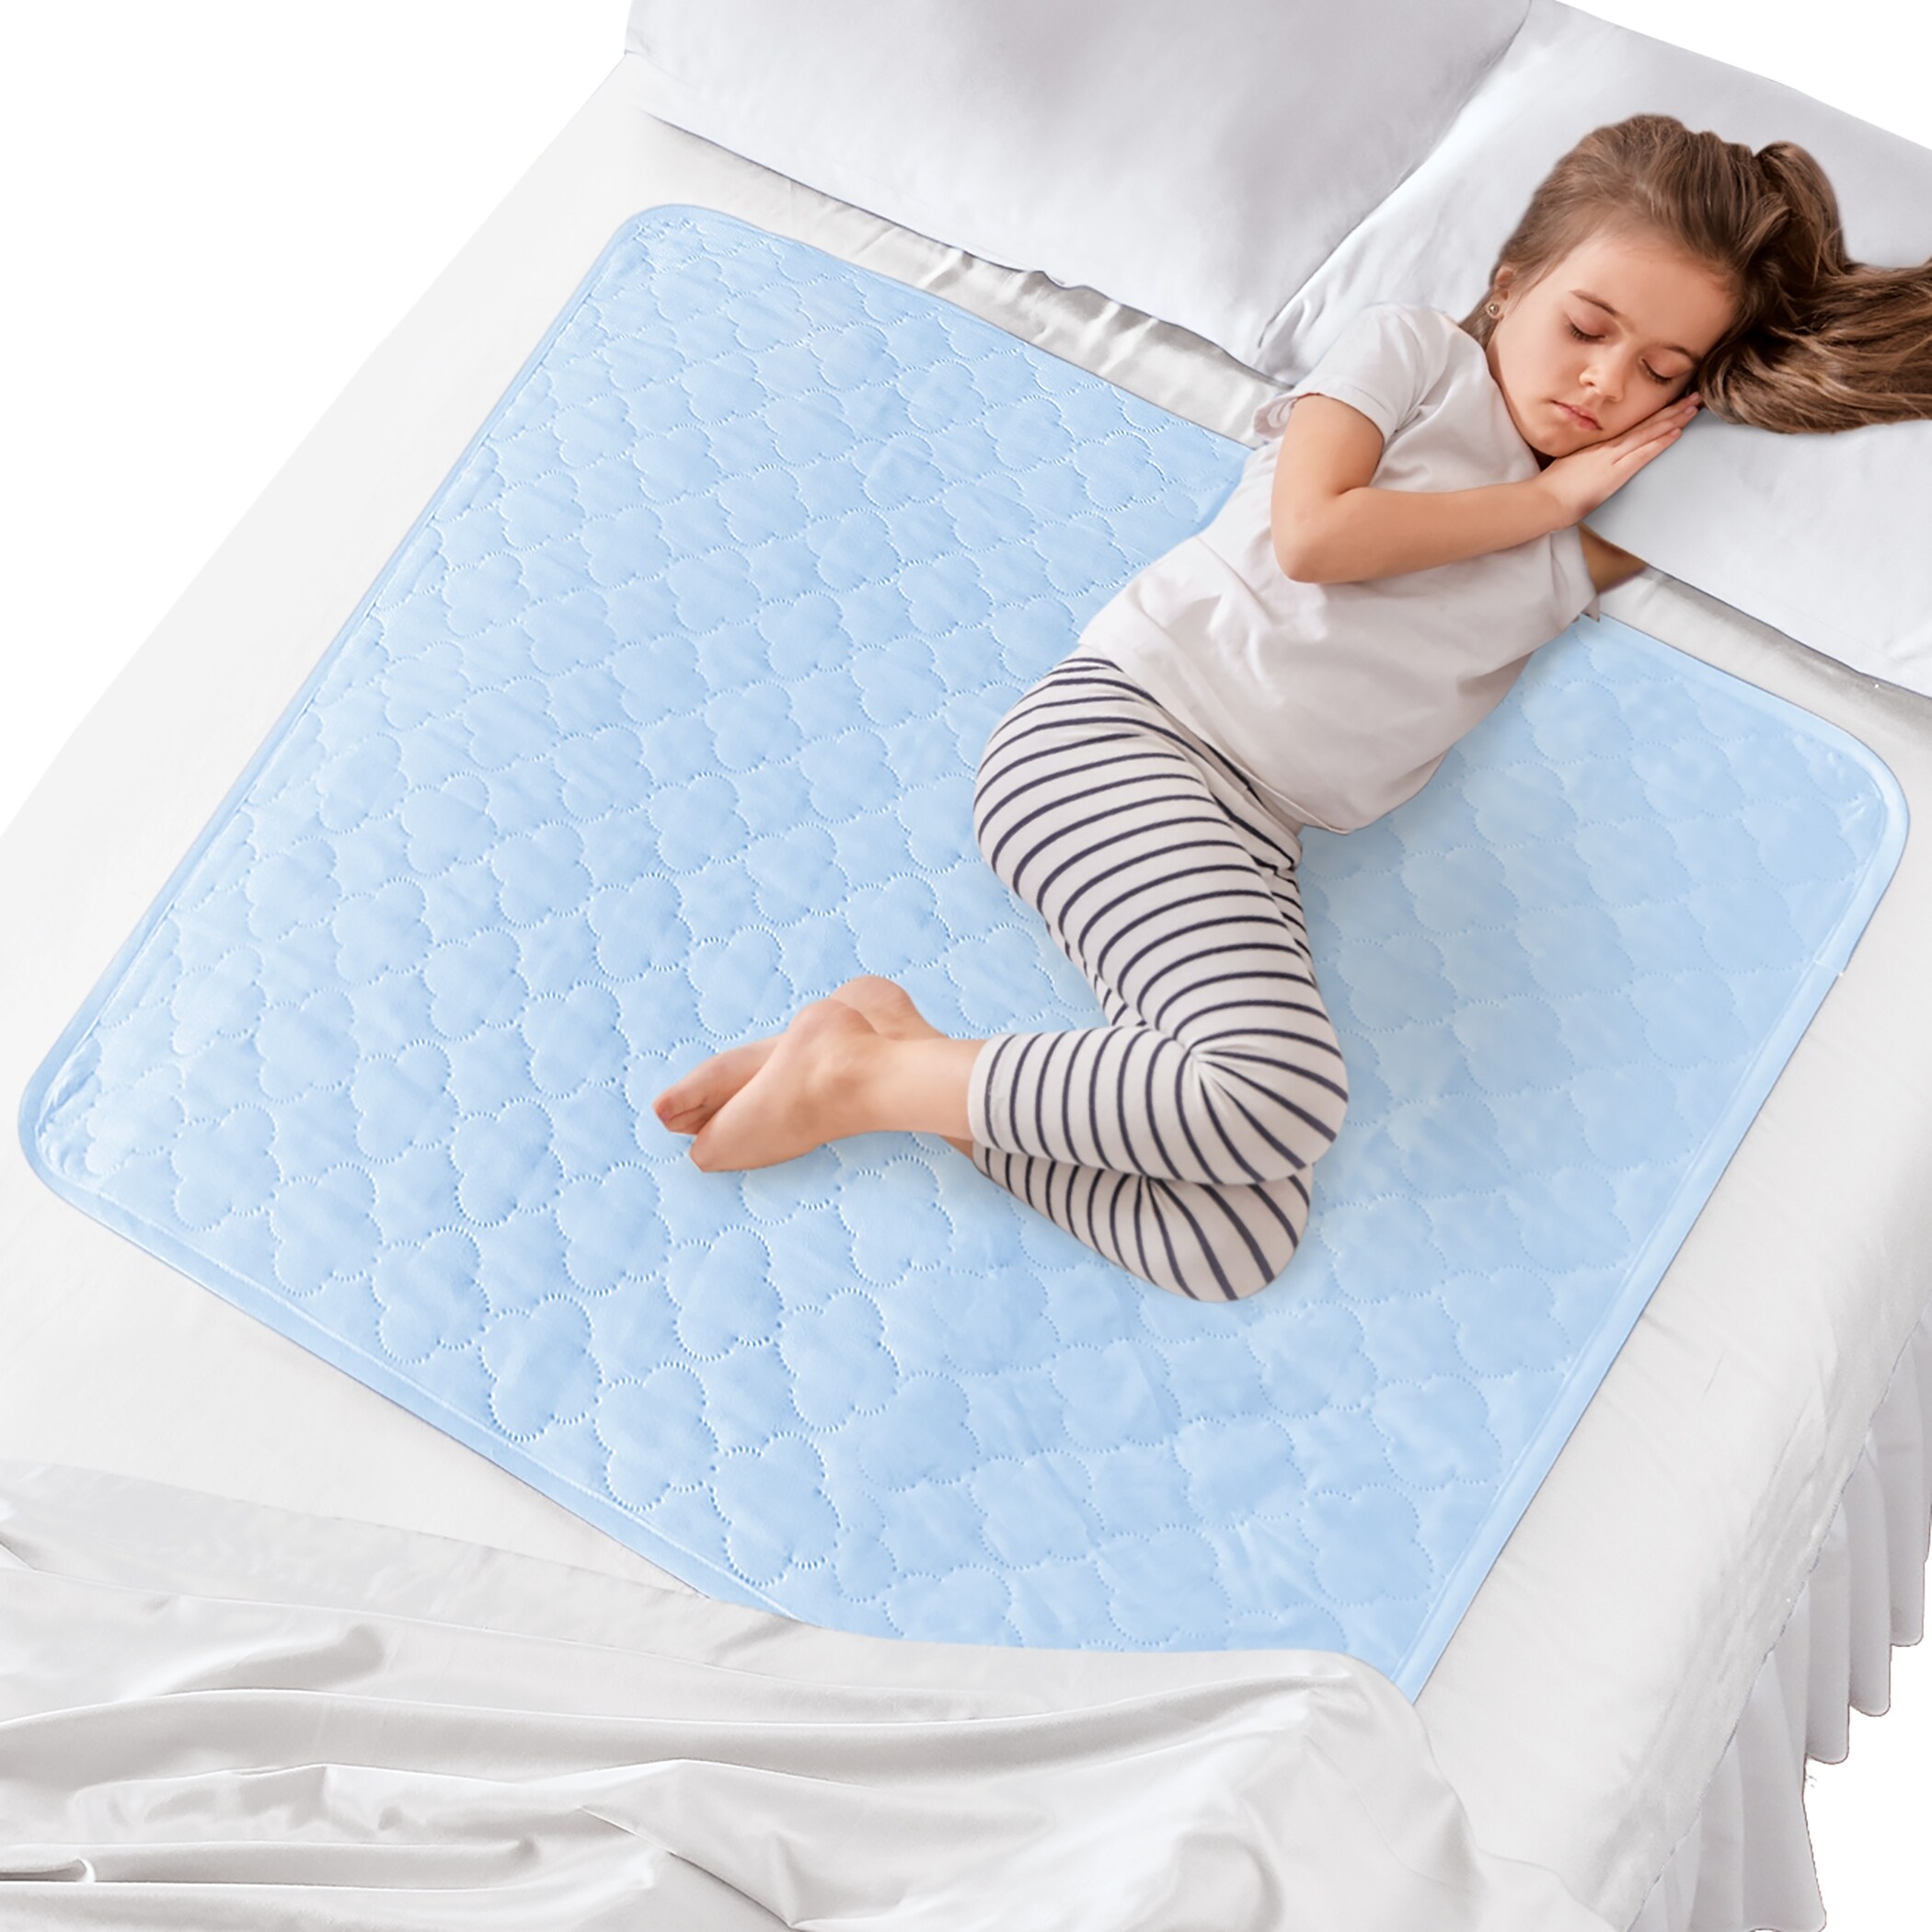 https://ak1.ostkcdn.com/images/products/is/images/direct/c5ef0faaf52ac4e2ecb215bb9a659b908db6301e/Highly-Absorbent-Washable-Waterproof-Bed-Pad.jpg